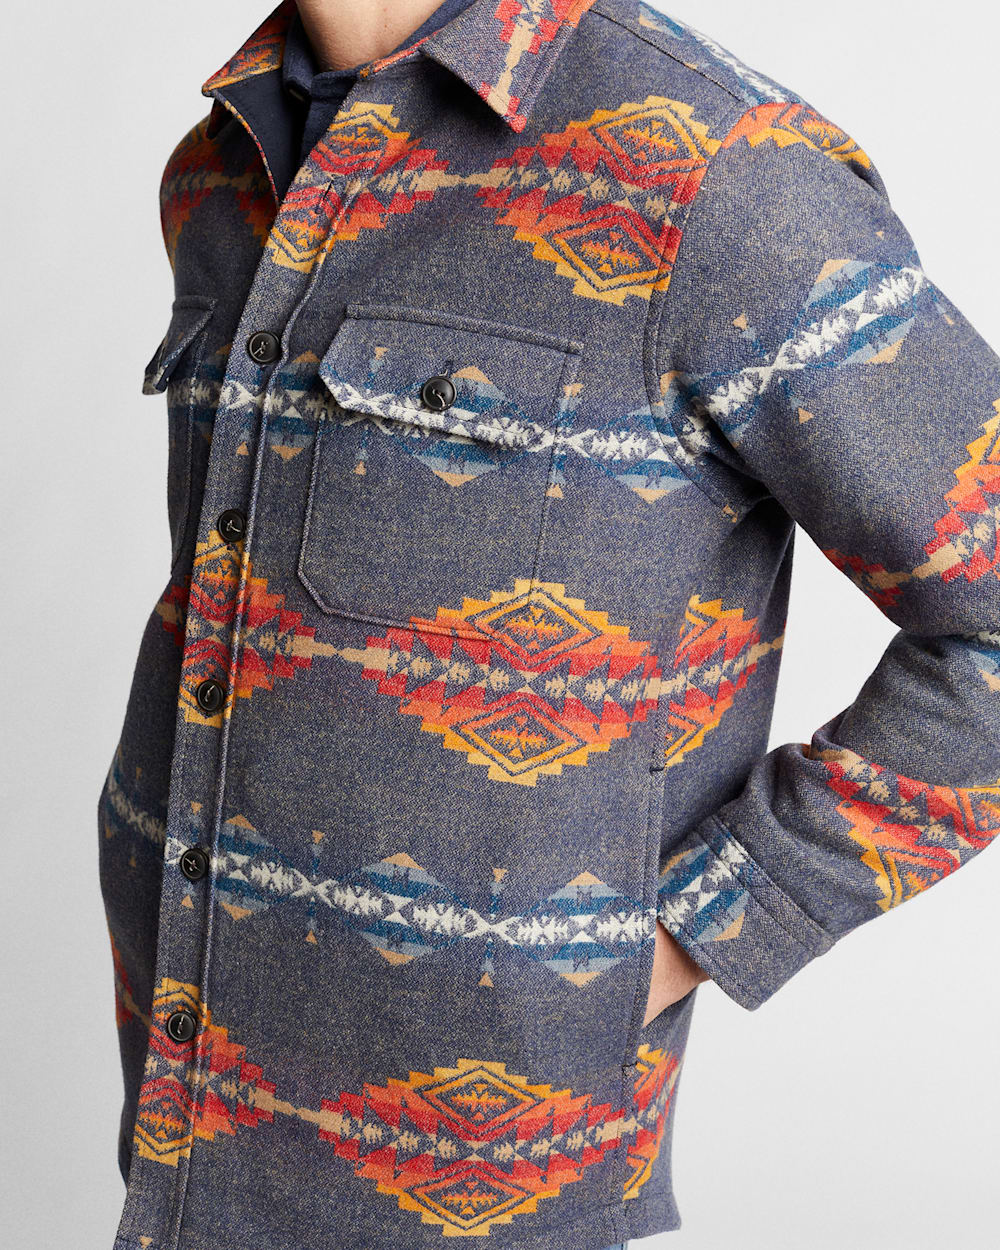 ALTERNATE VIEW OF MEN'S PINTO MOUNTAINS JACQUARD QUILTED SHIRT JACKET IN NAVY image number 6